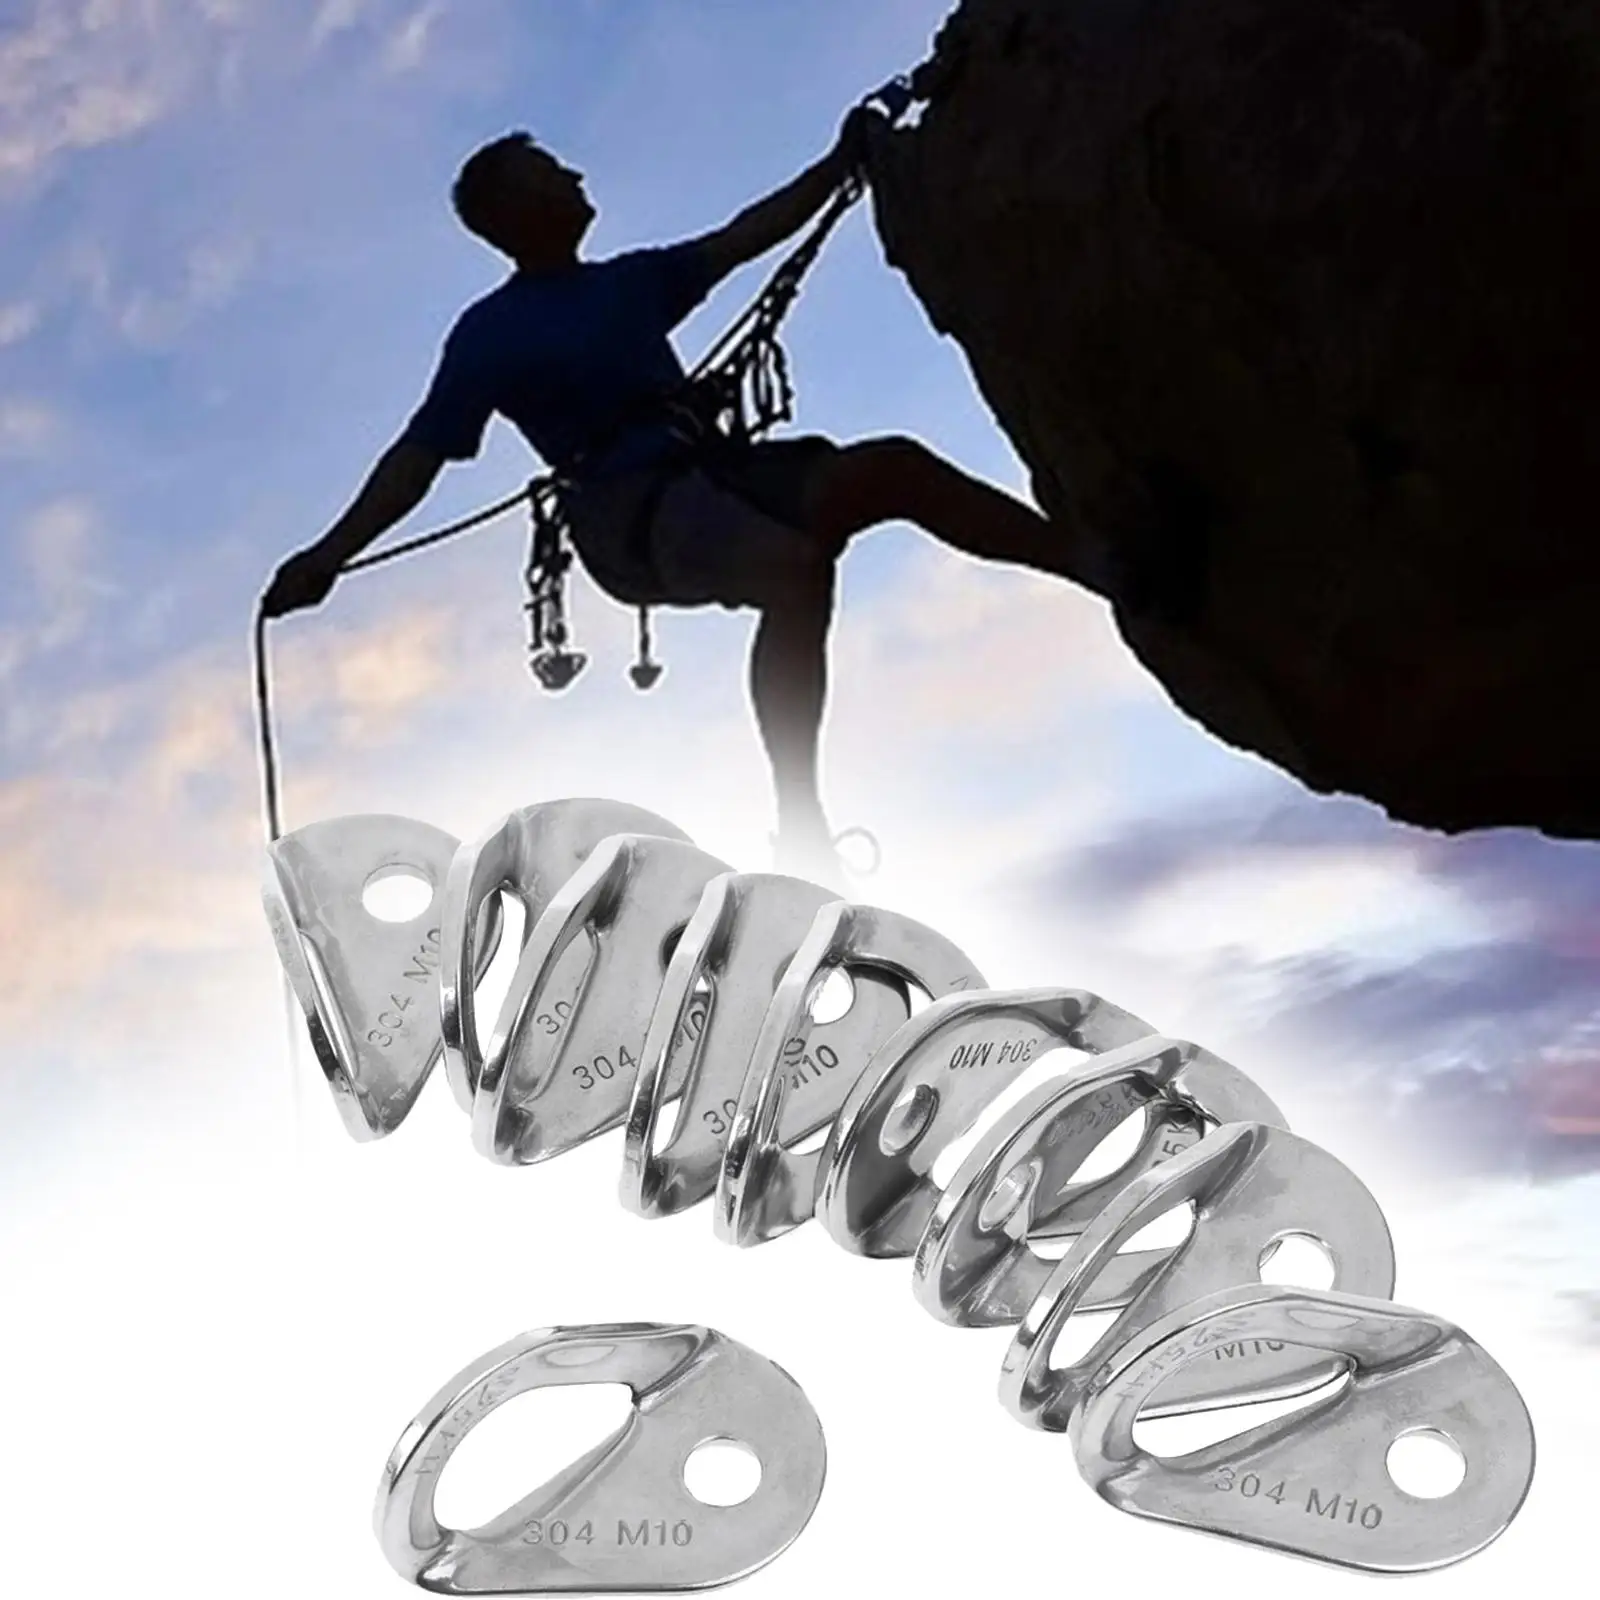 10Pcs Rock Climbing Anchor Hanging Bolt Hanger 25kN Anchor Point Connector Hanger Plate for Caving Outdoor Sports Mountaineering